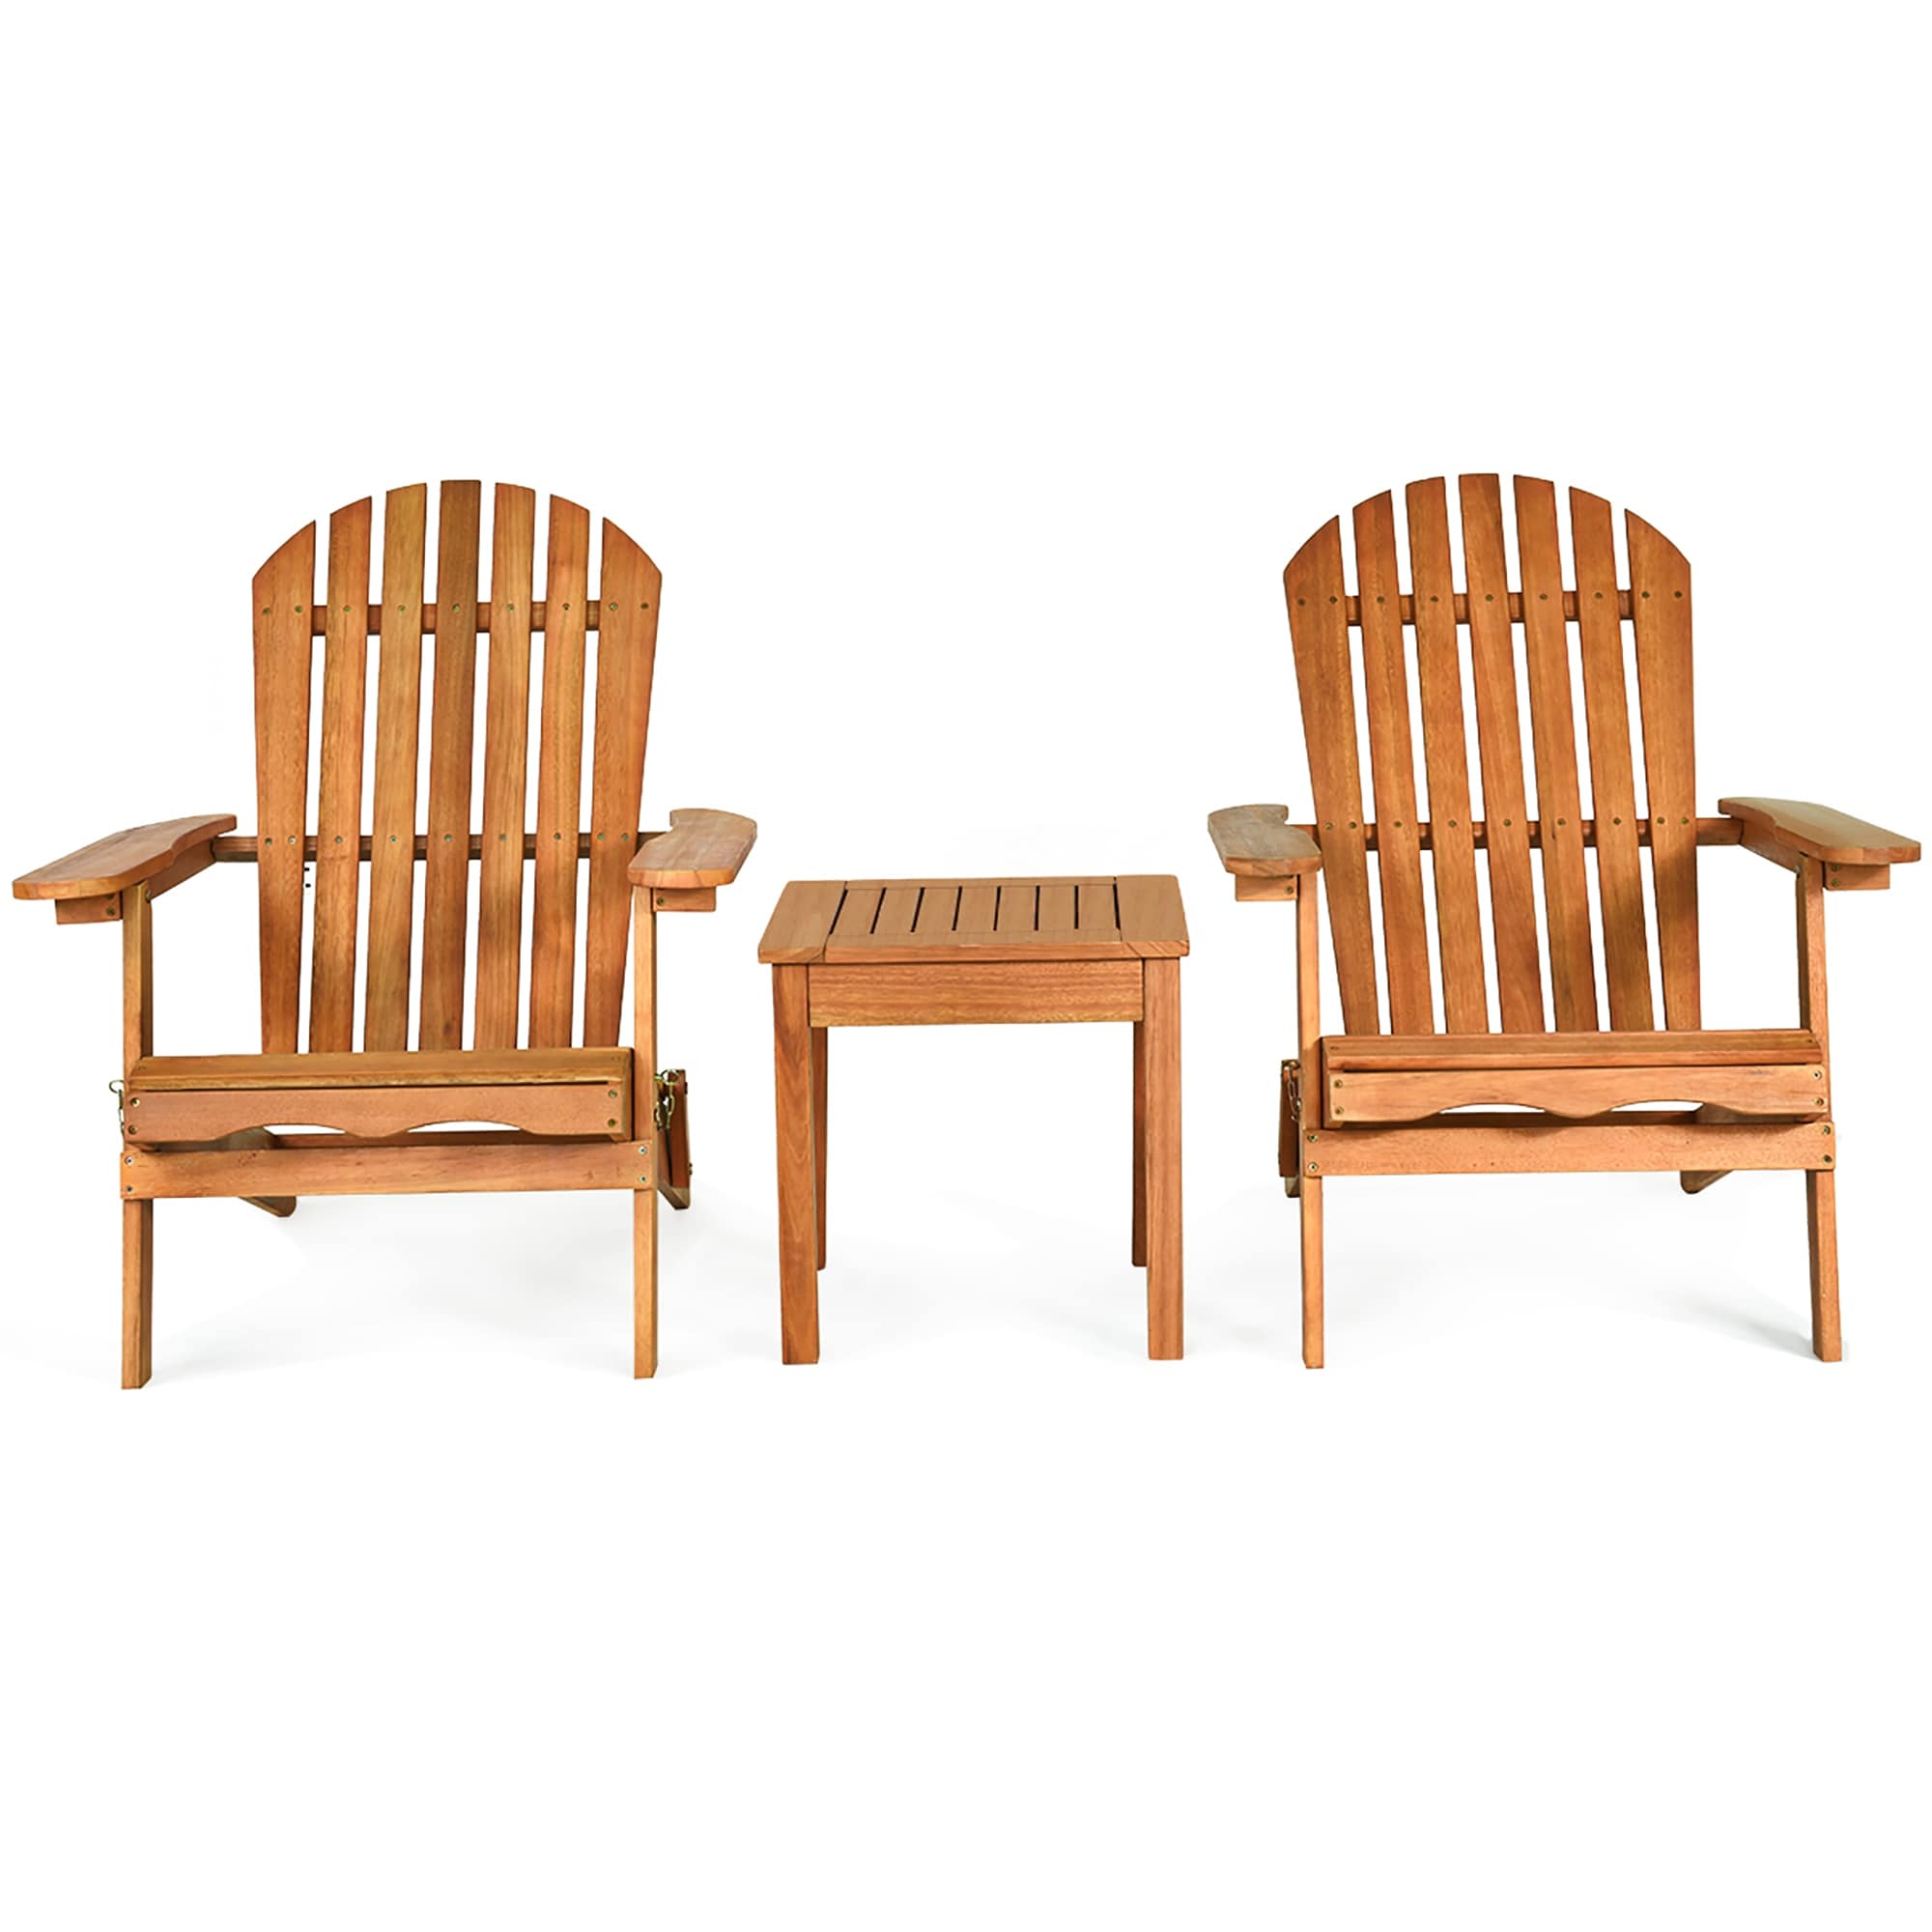 3 Piece Adirondack Chair Set Foldable Wooden Chairs And Table Set